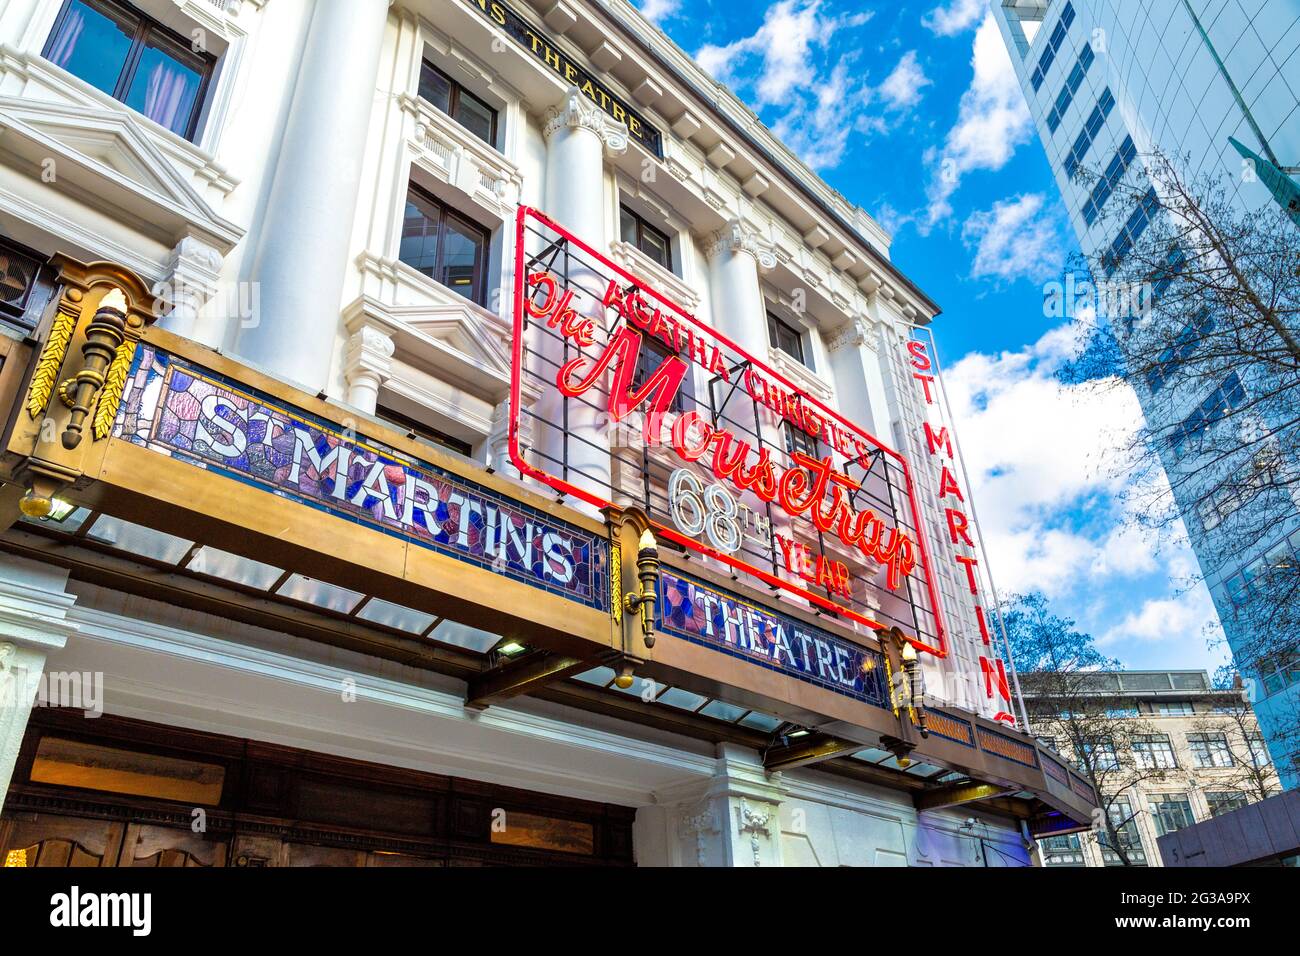 Exterior of St Martin's Theatre housing the longest running play in the West End - The Mousetrap by Agatha Christie, London, UK Stock Photo